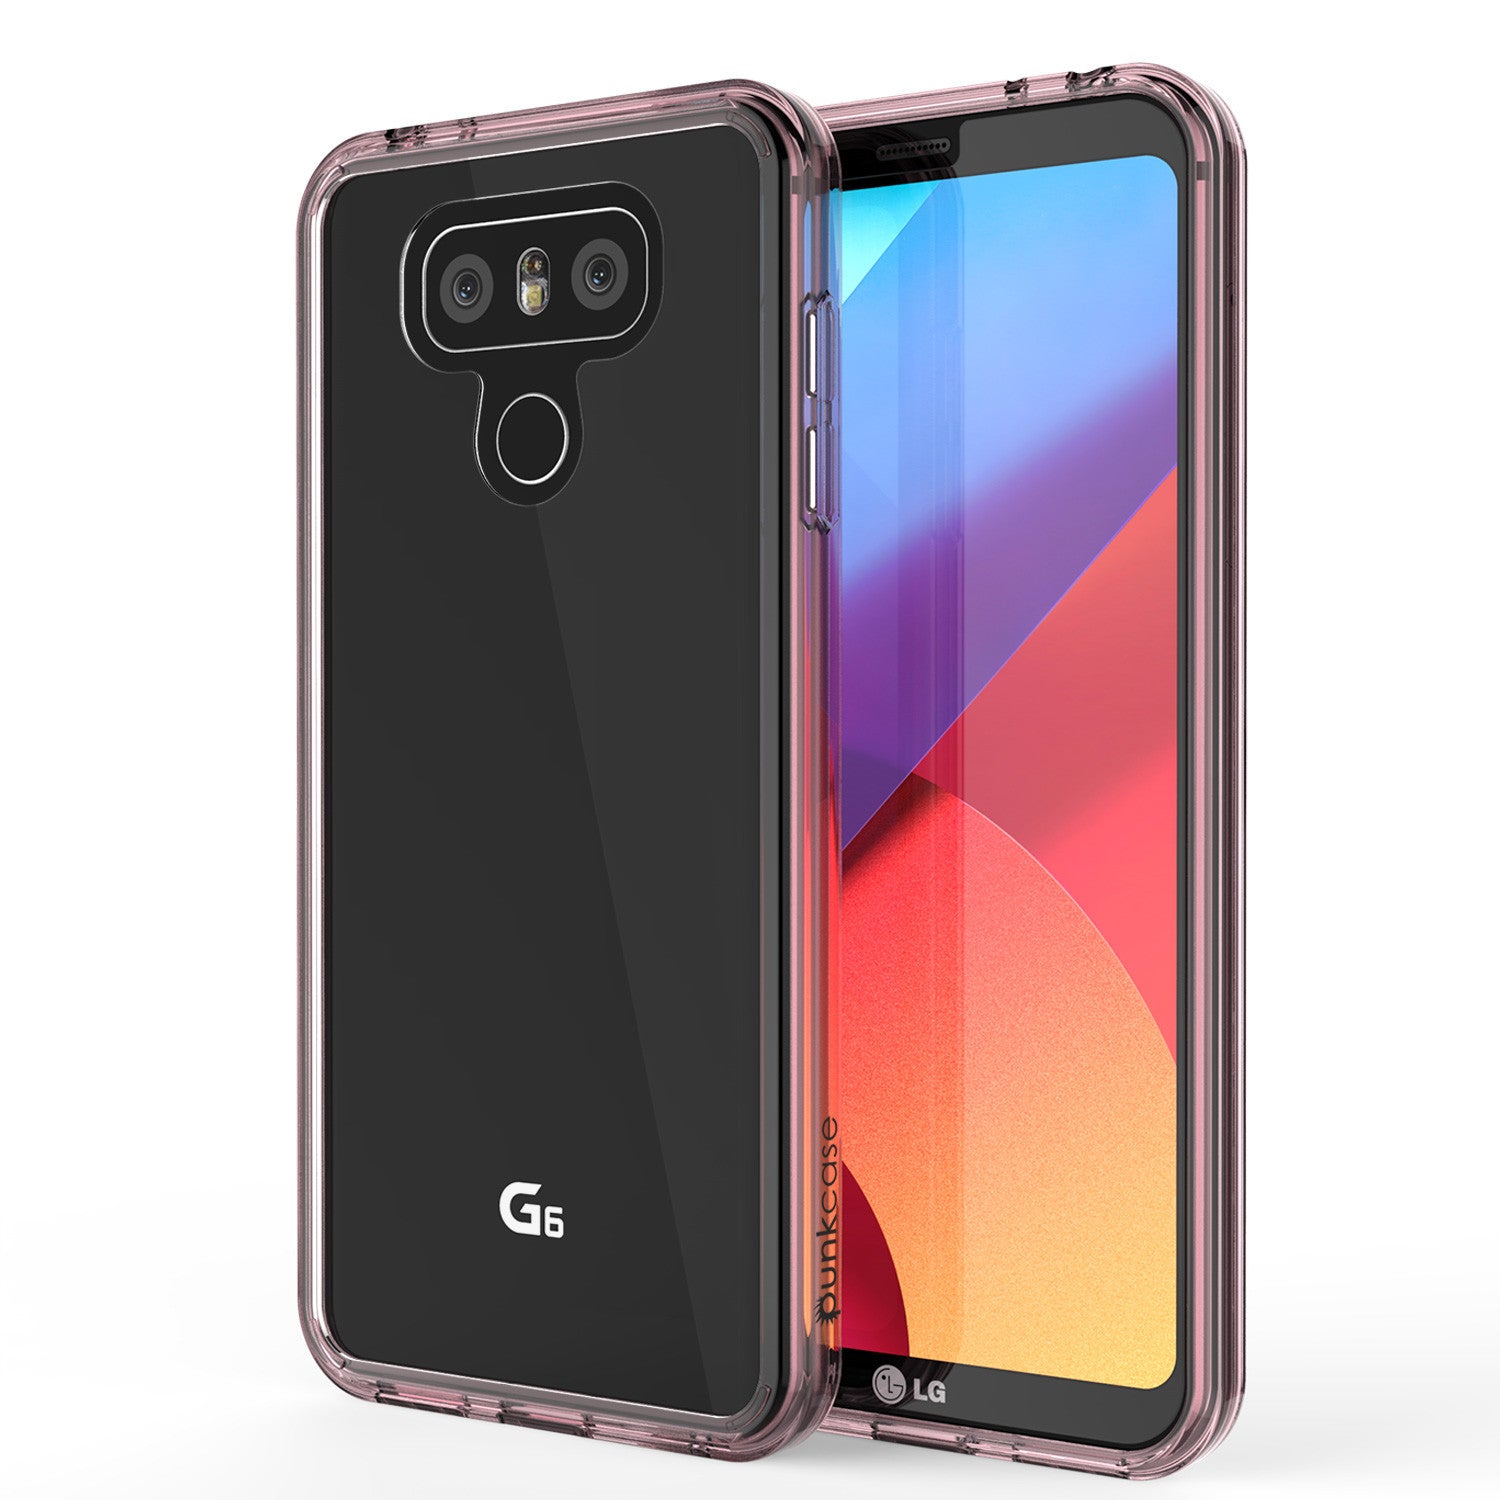 LG G6 Case Punkcase® LUCID 2.0 Crystal Pink Series w/ PUNK SHIELD Screen Protector | Ultra Fit (Color in image: crystal pink)